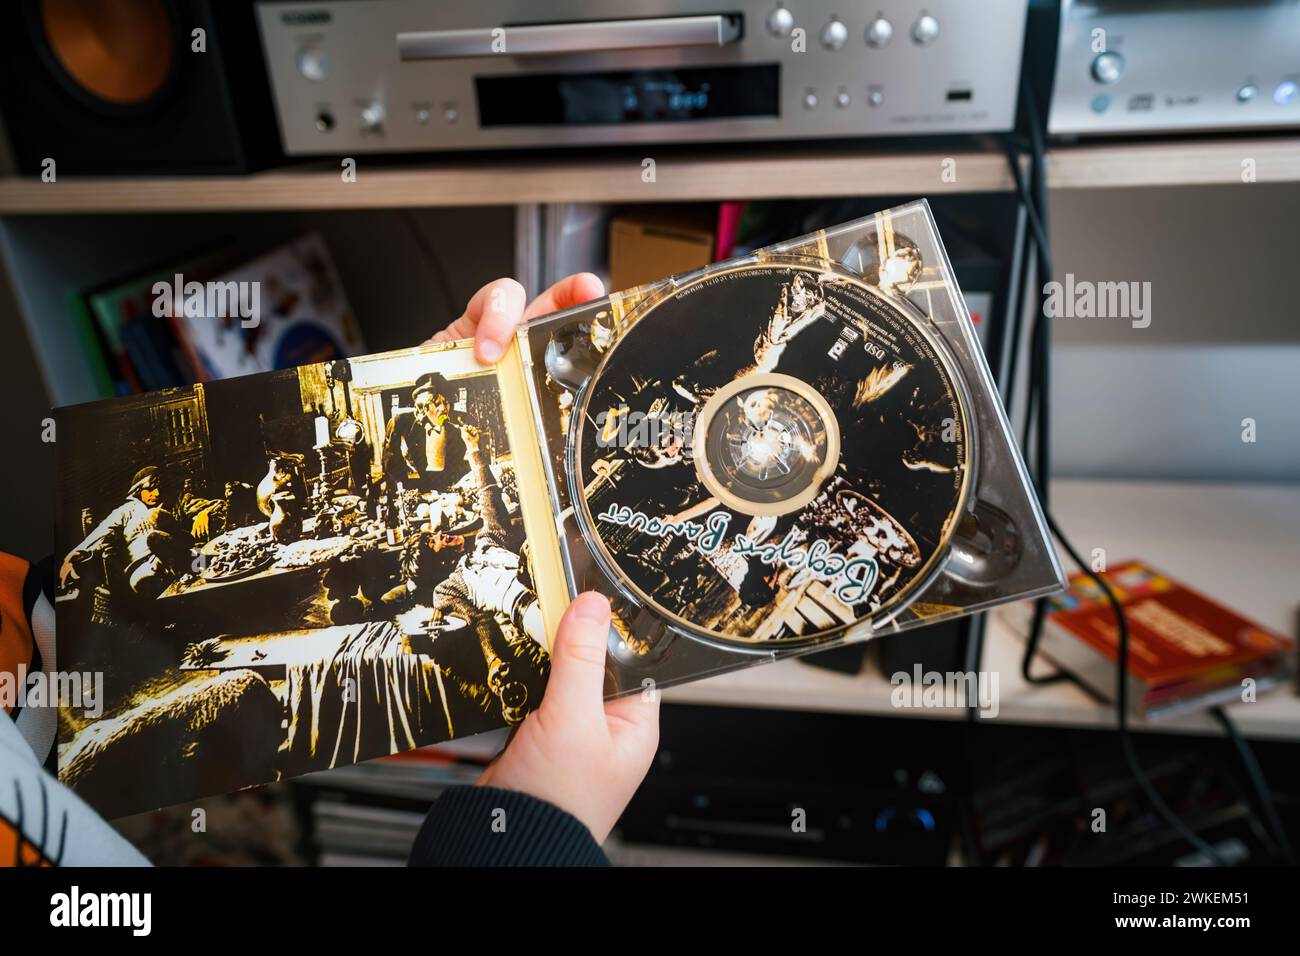 Paris, France - Jan 17, 2024: A captivating scene featuring a toddler holding the iconic album Beggars Banquet by The Rolling Stones in SACD Super Audio CD audiophile format, symbolizing early exposure to legendary music. Stock Photo